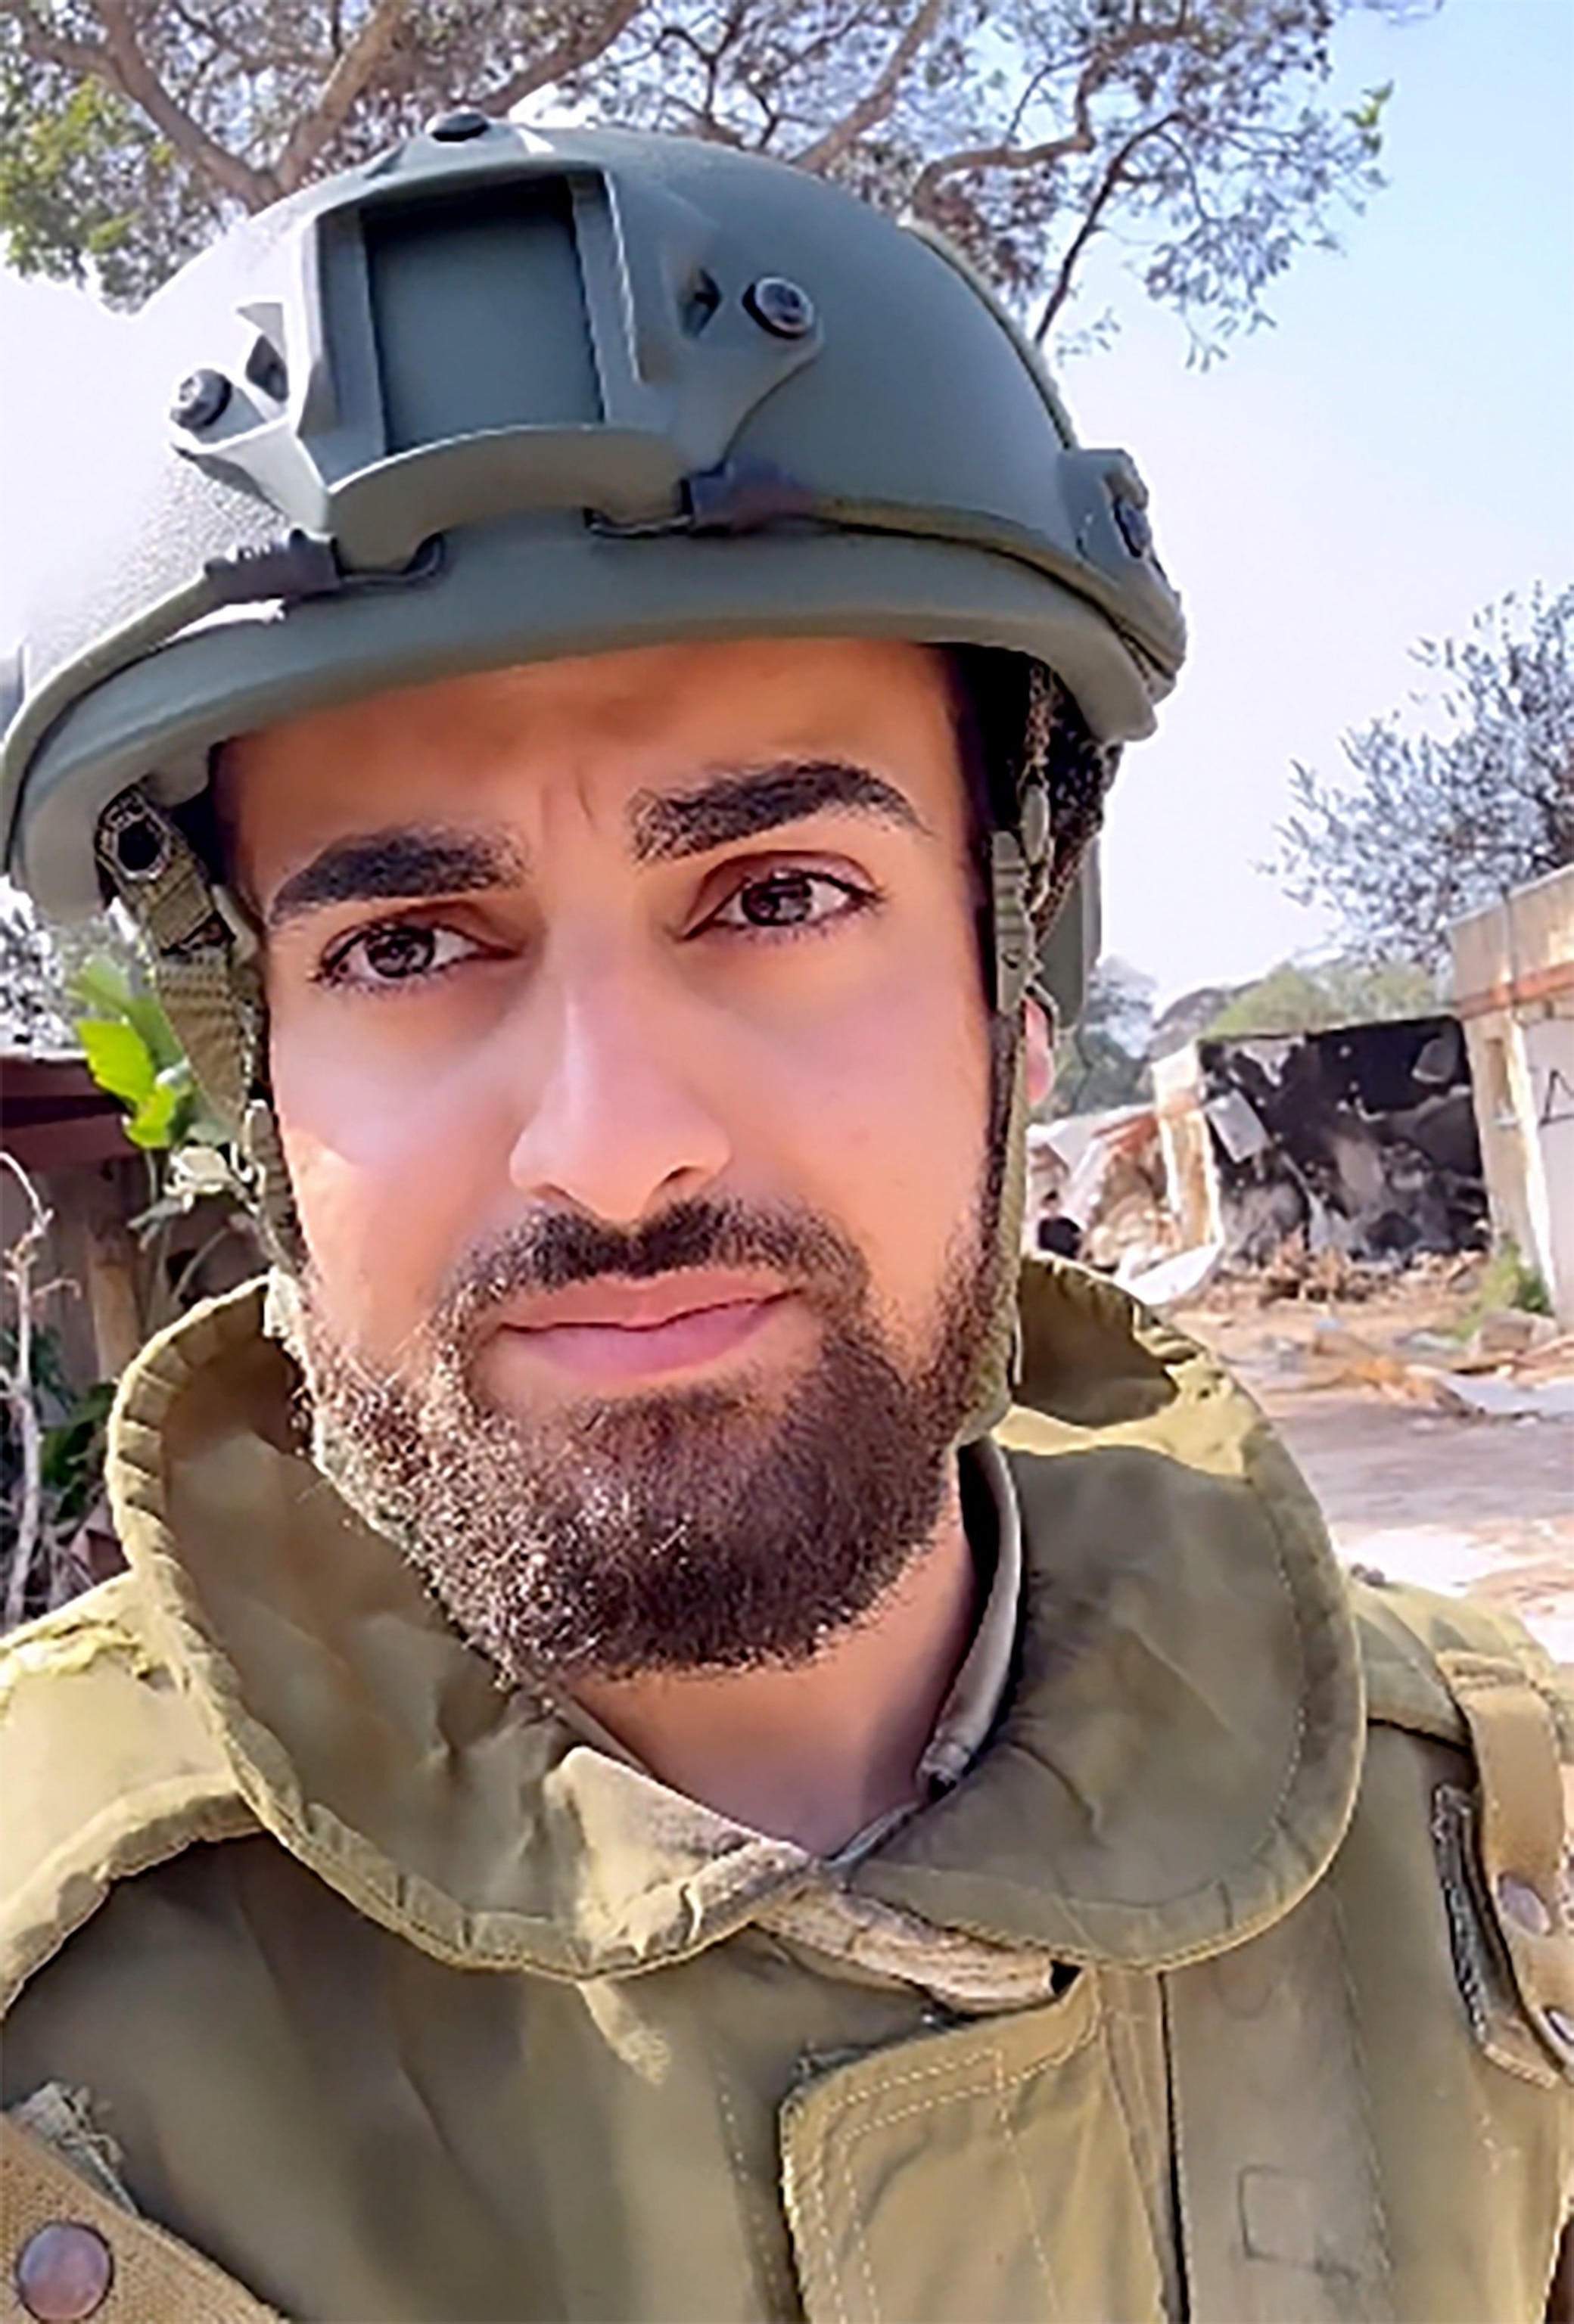 PHOTO: Adiel Cohen, 25, pictured in this undated photo is a pro-Israel social media influencer and content creator who is also a soldier for the Israel Defense Forces on the front lines in northern Israel.
